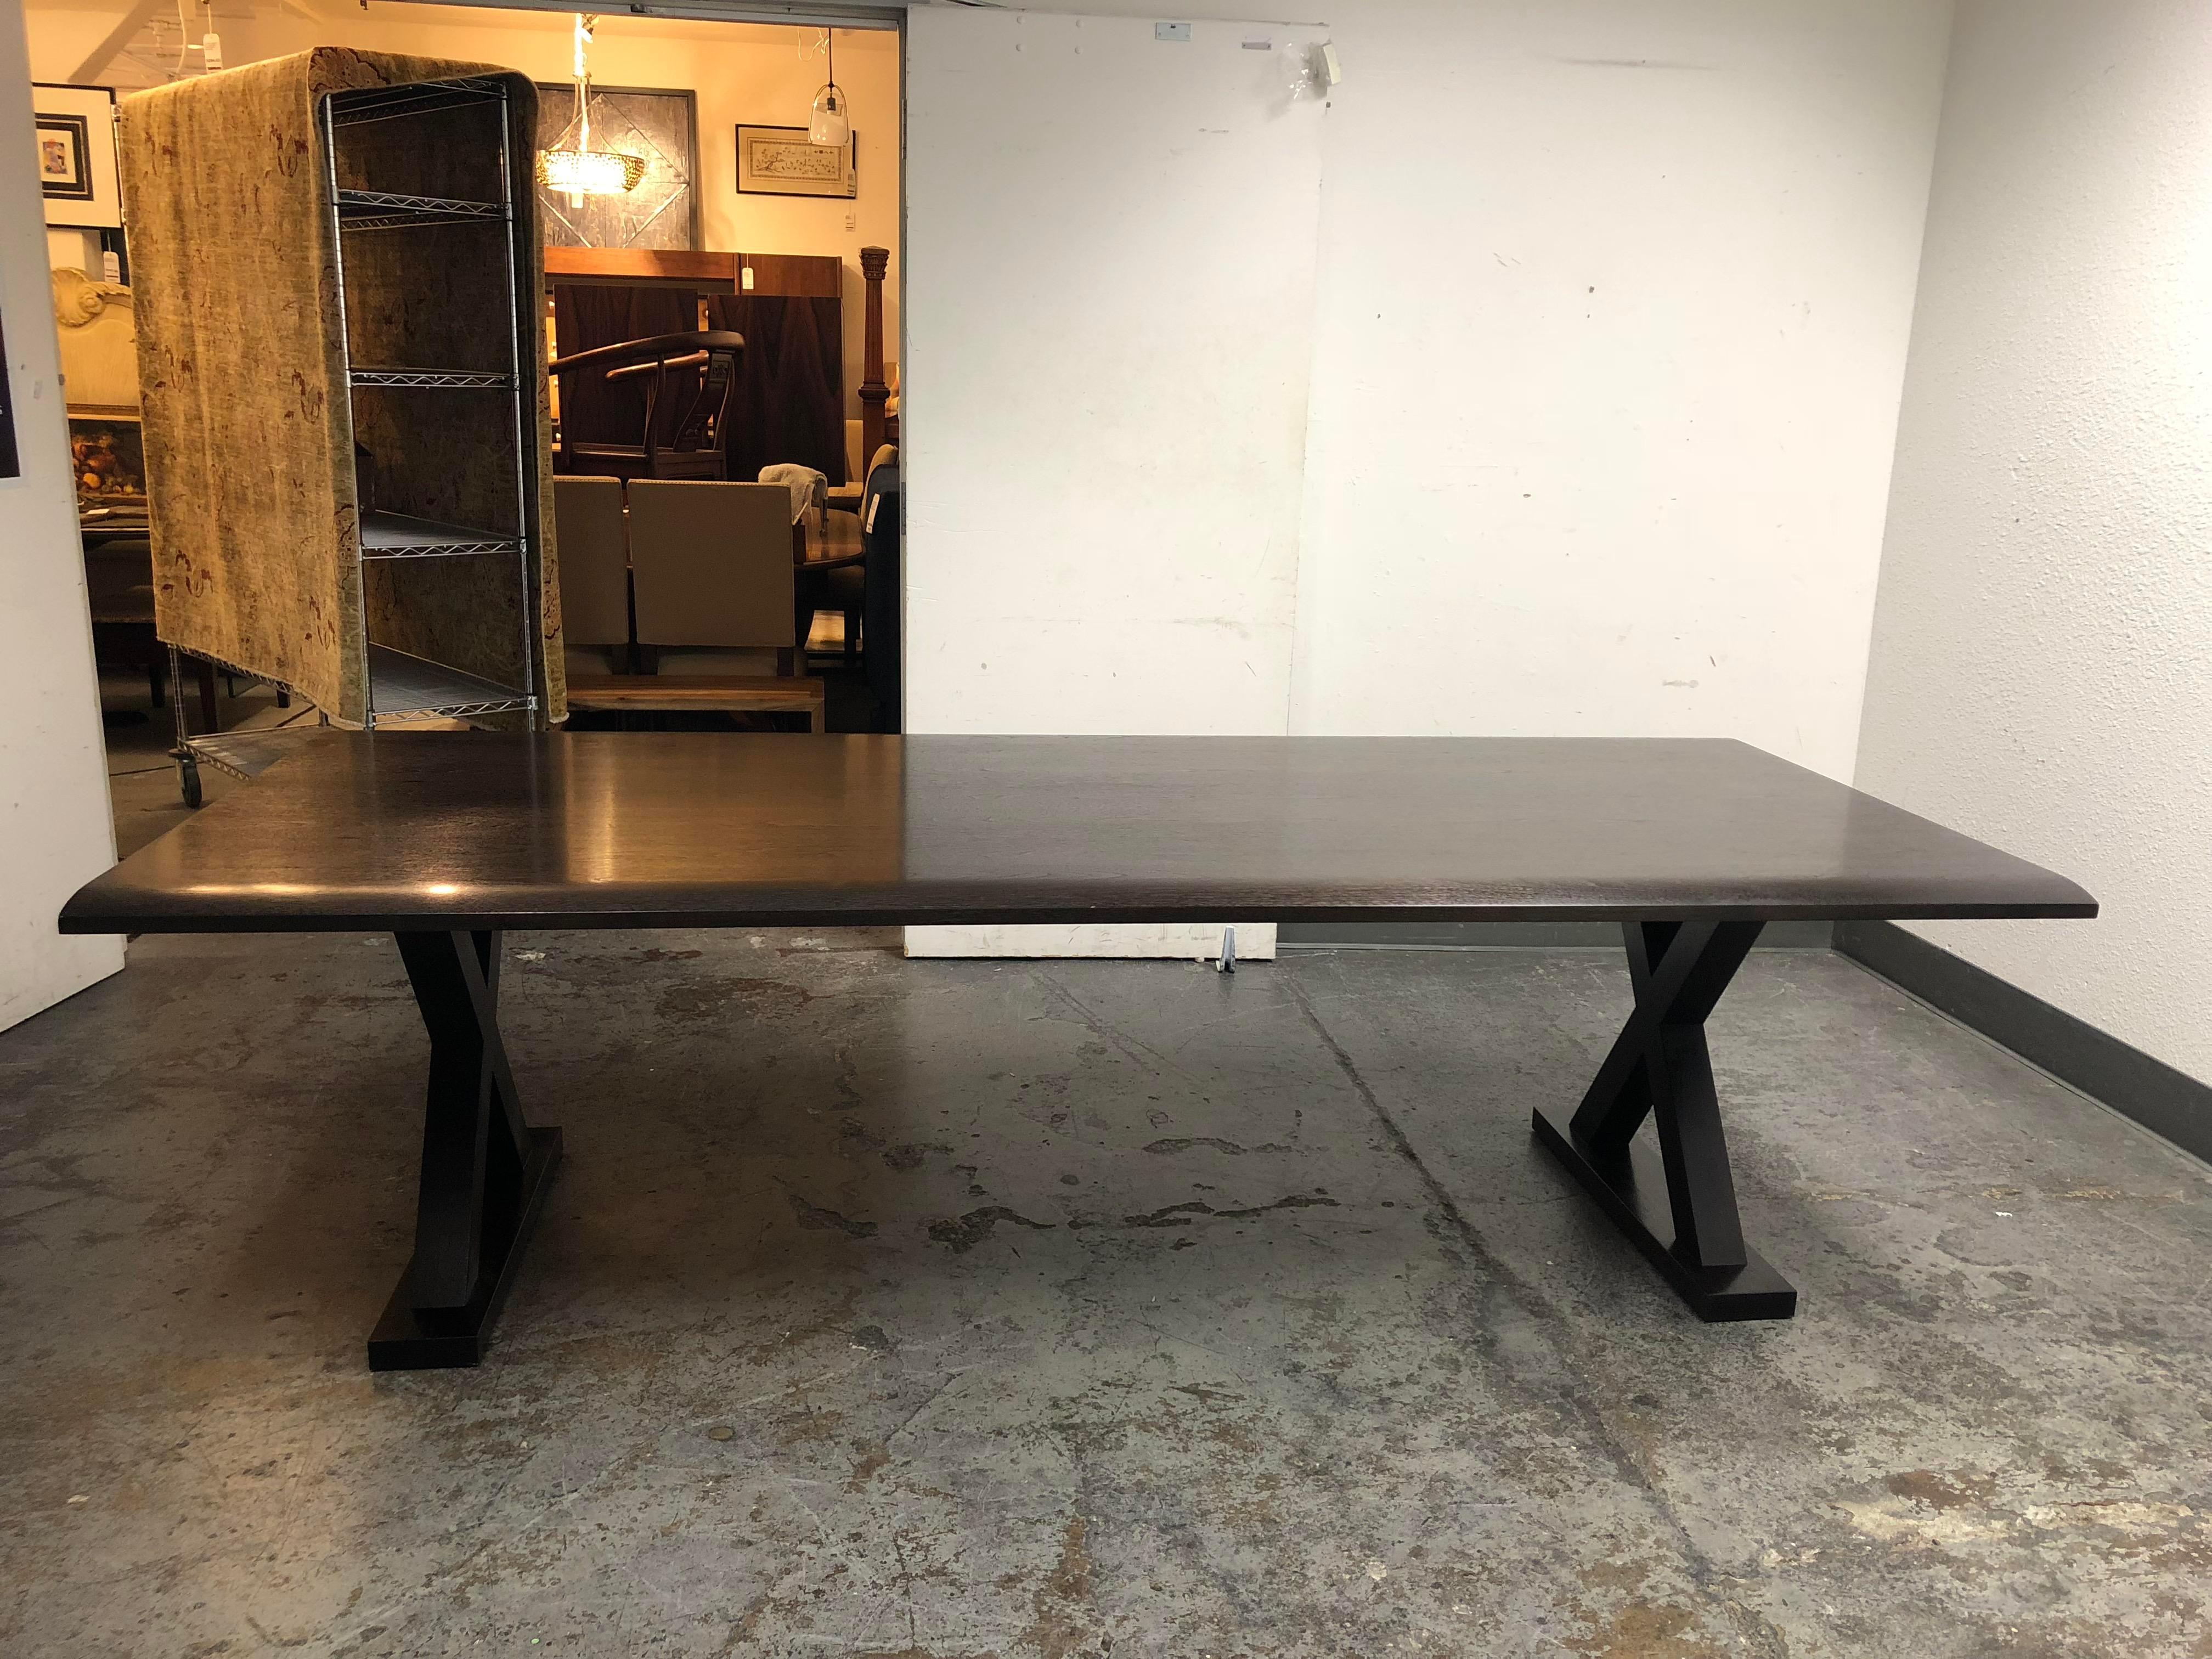 A custom-sized 'Courrier' table by Christian Liaigre for Holly Hunt. The bevelled edge tabletop is in an ebonized walnut with a dark espresso finish. Minor wear on edge. The table is supported by an X-frame trestle base.
 
 